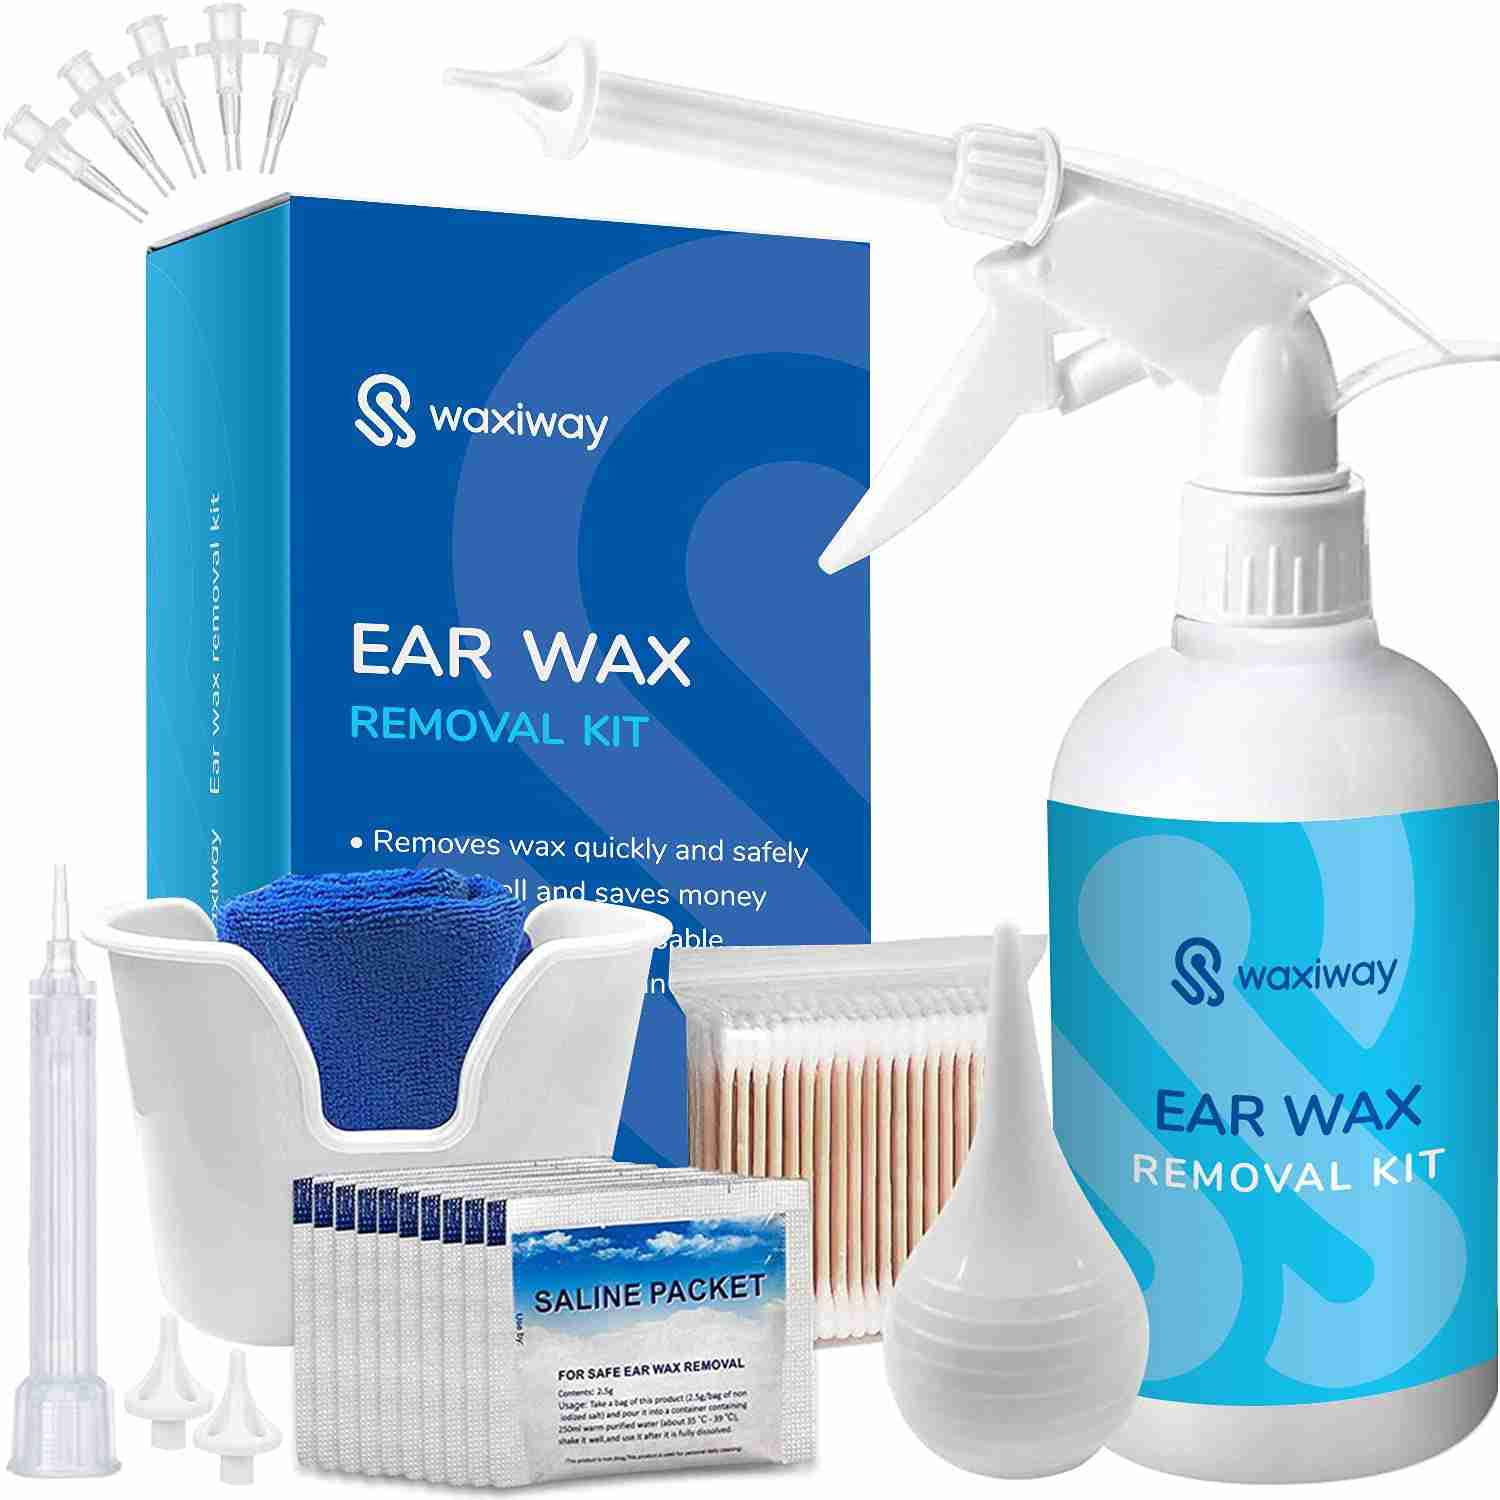 Ear-Wax-Removal with cash back rebate